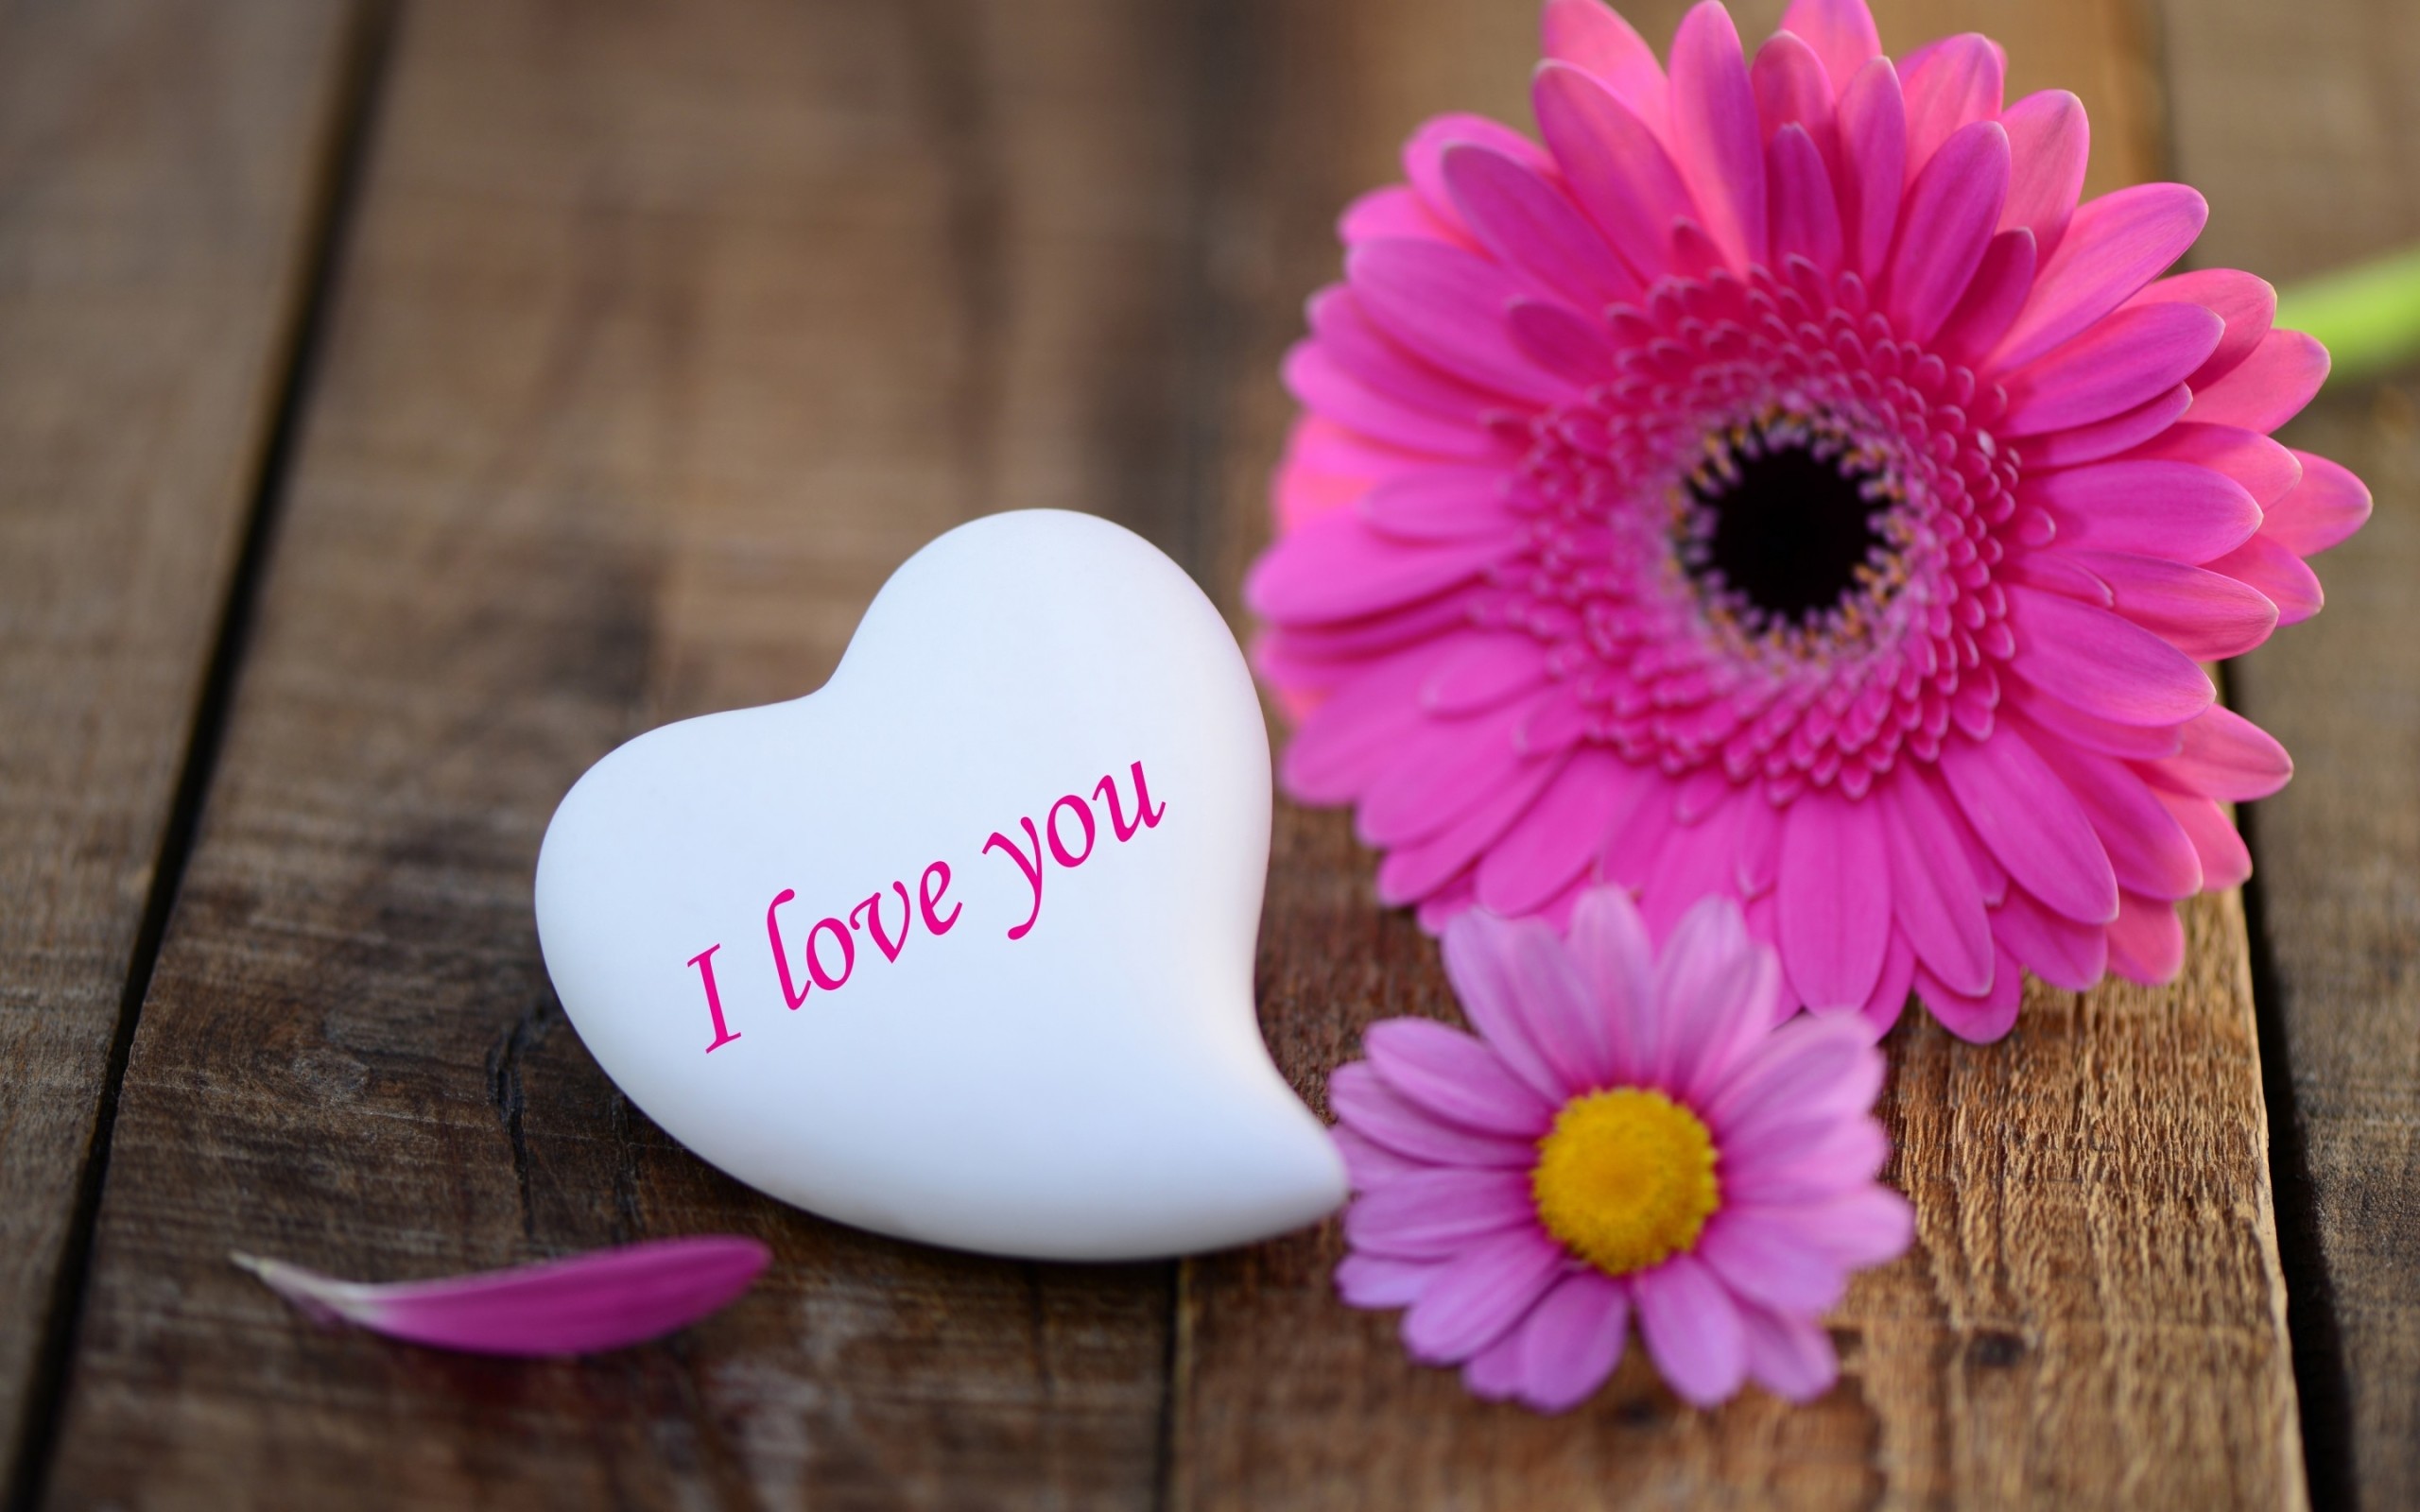 2560x1600 pink daisies heart stone i love you wide wallpaper pink daisies heart stone  i love you wide wallpaper x